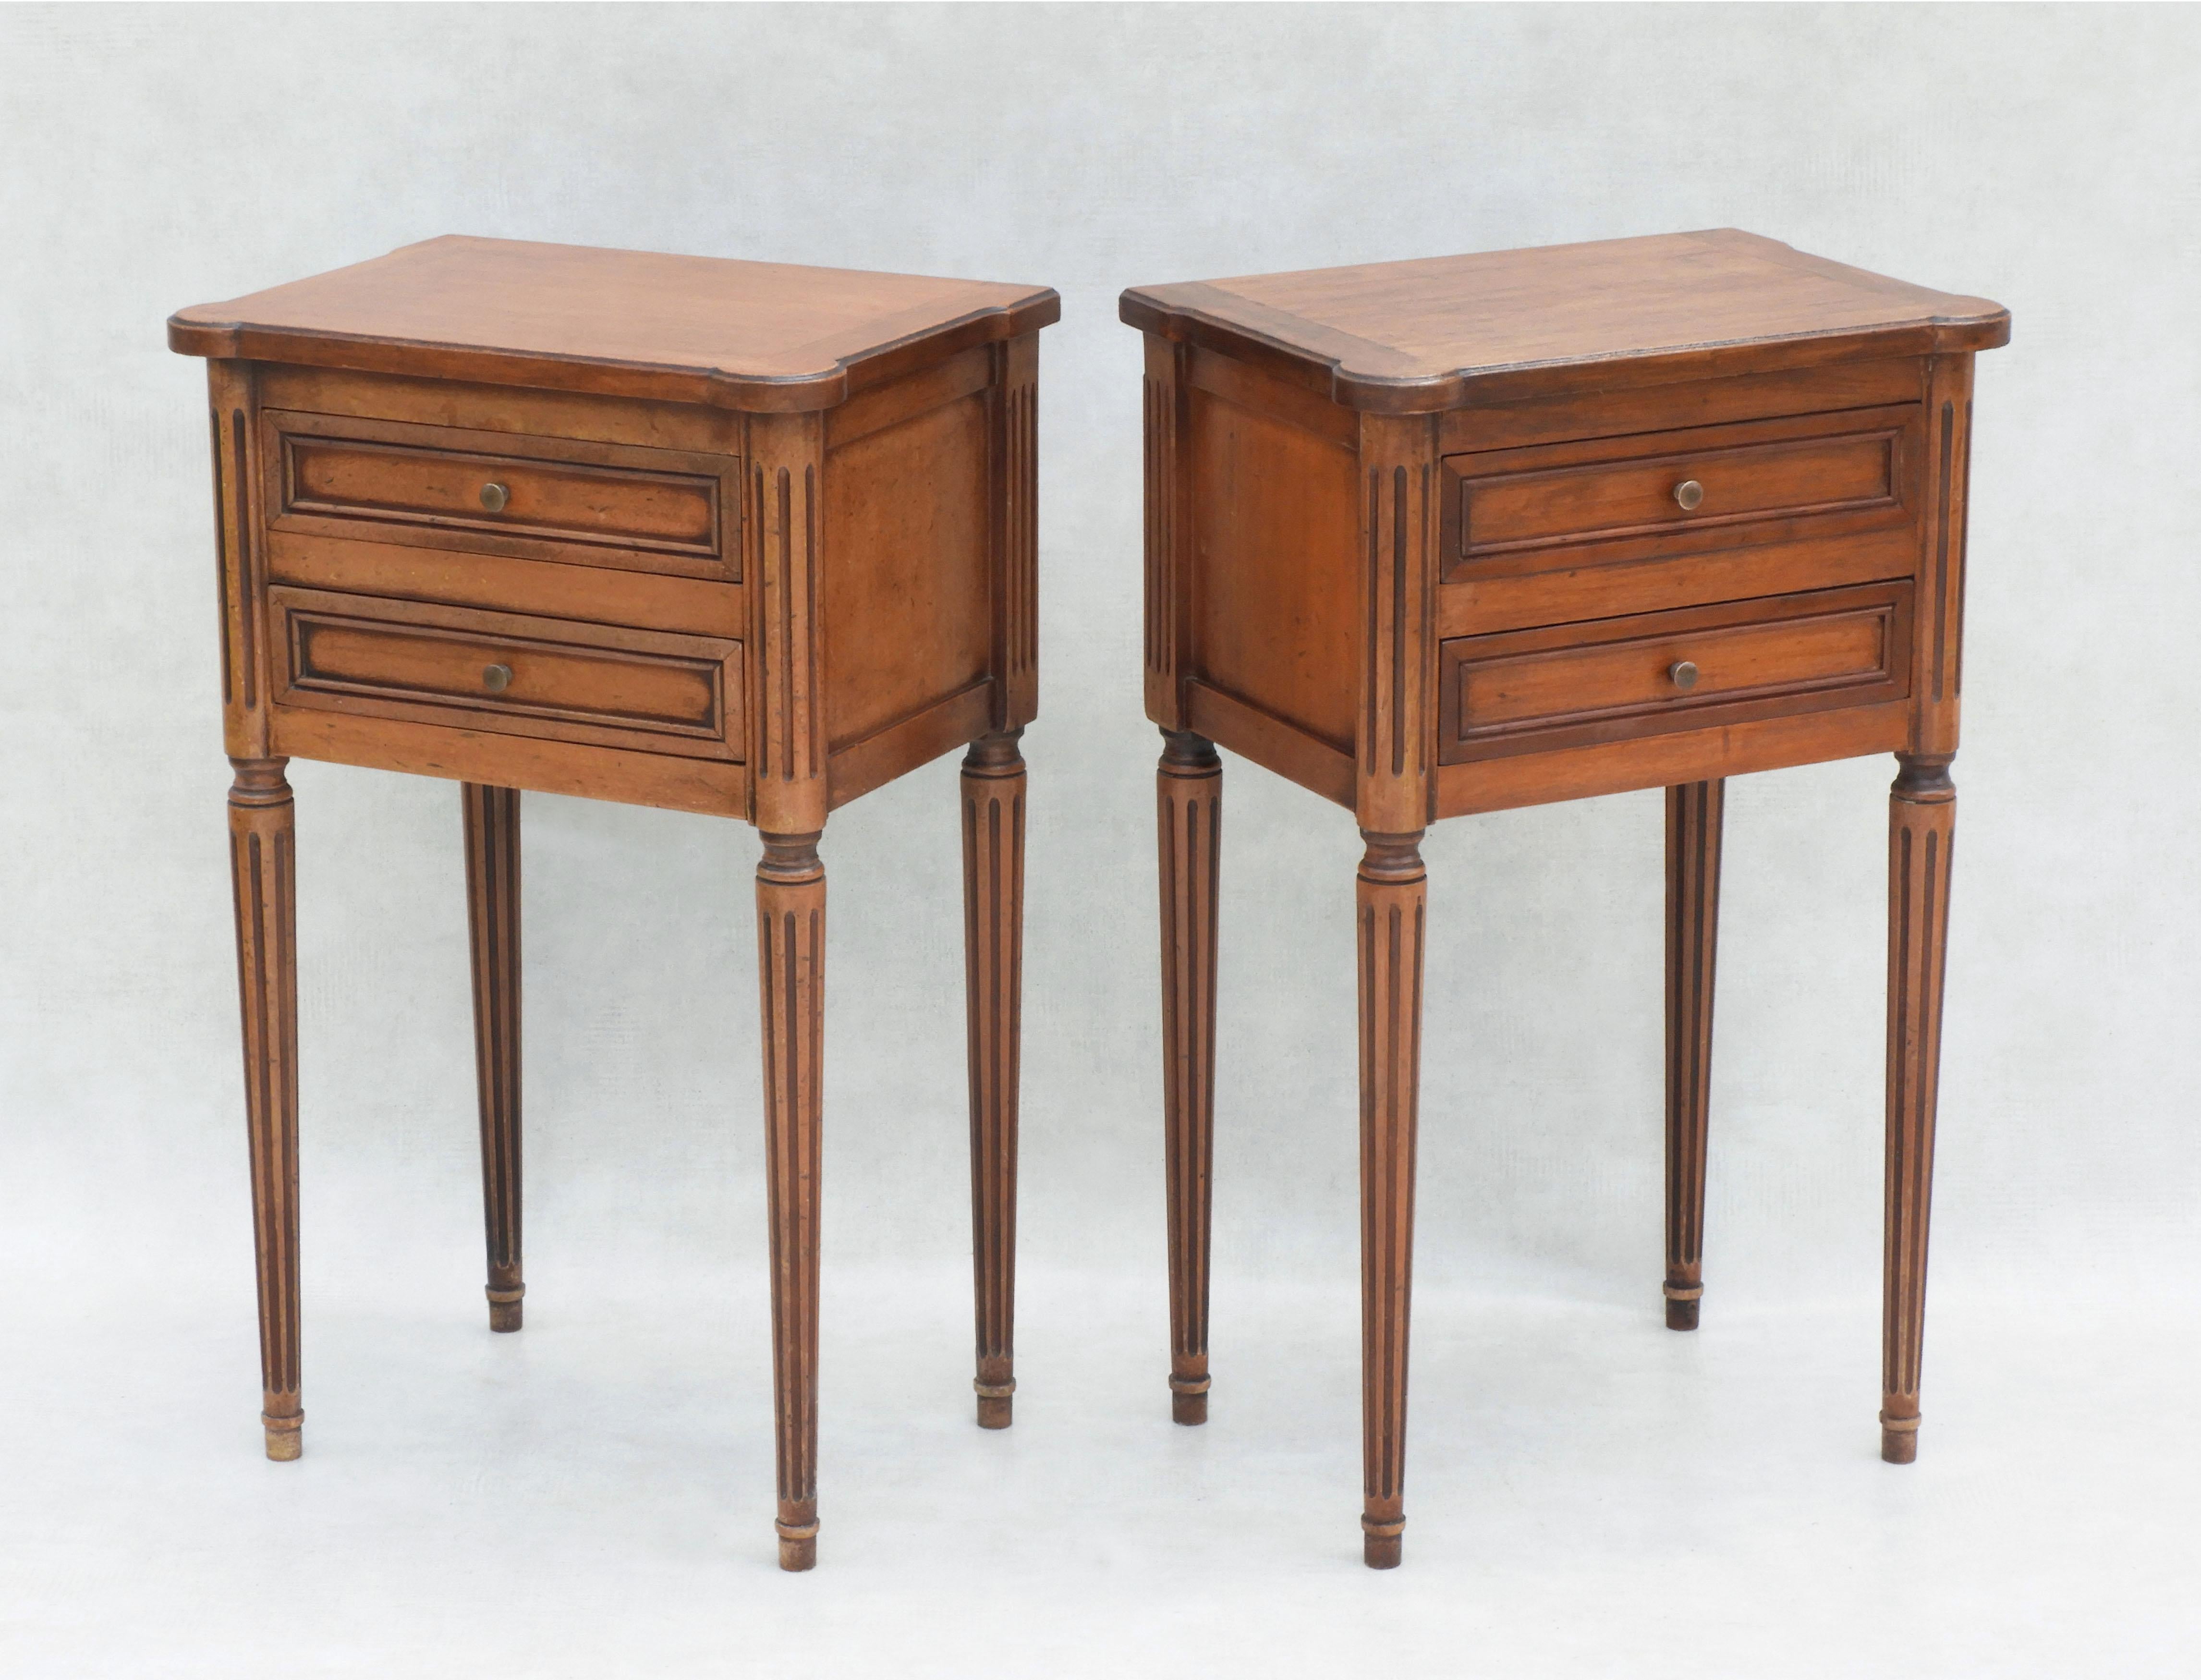 Two Midcentury Louis XVI Revival bedside tables or nightstands.
A Duo of Neoclassical-style two-drawer walnut side cabinets with carved fluted tapered legs and column detailing and brass handles. Stylish and practical tables that will work equally